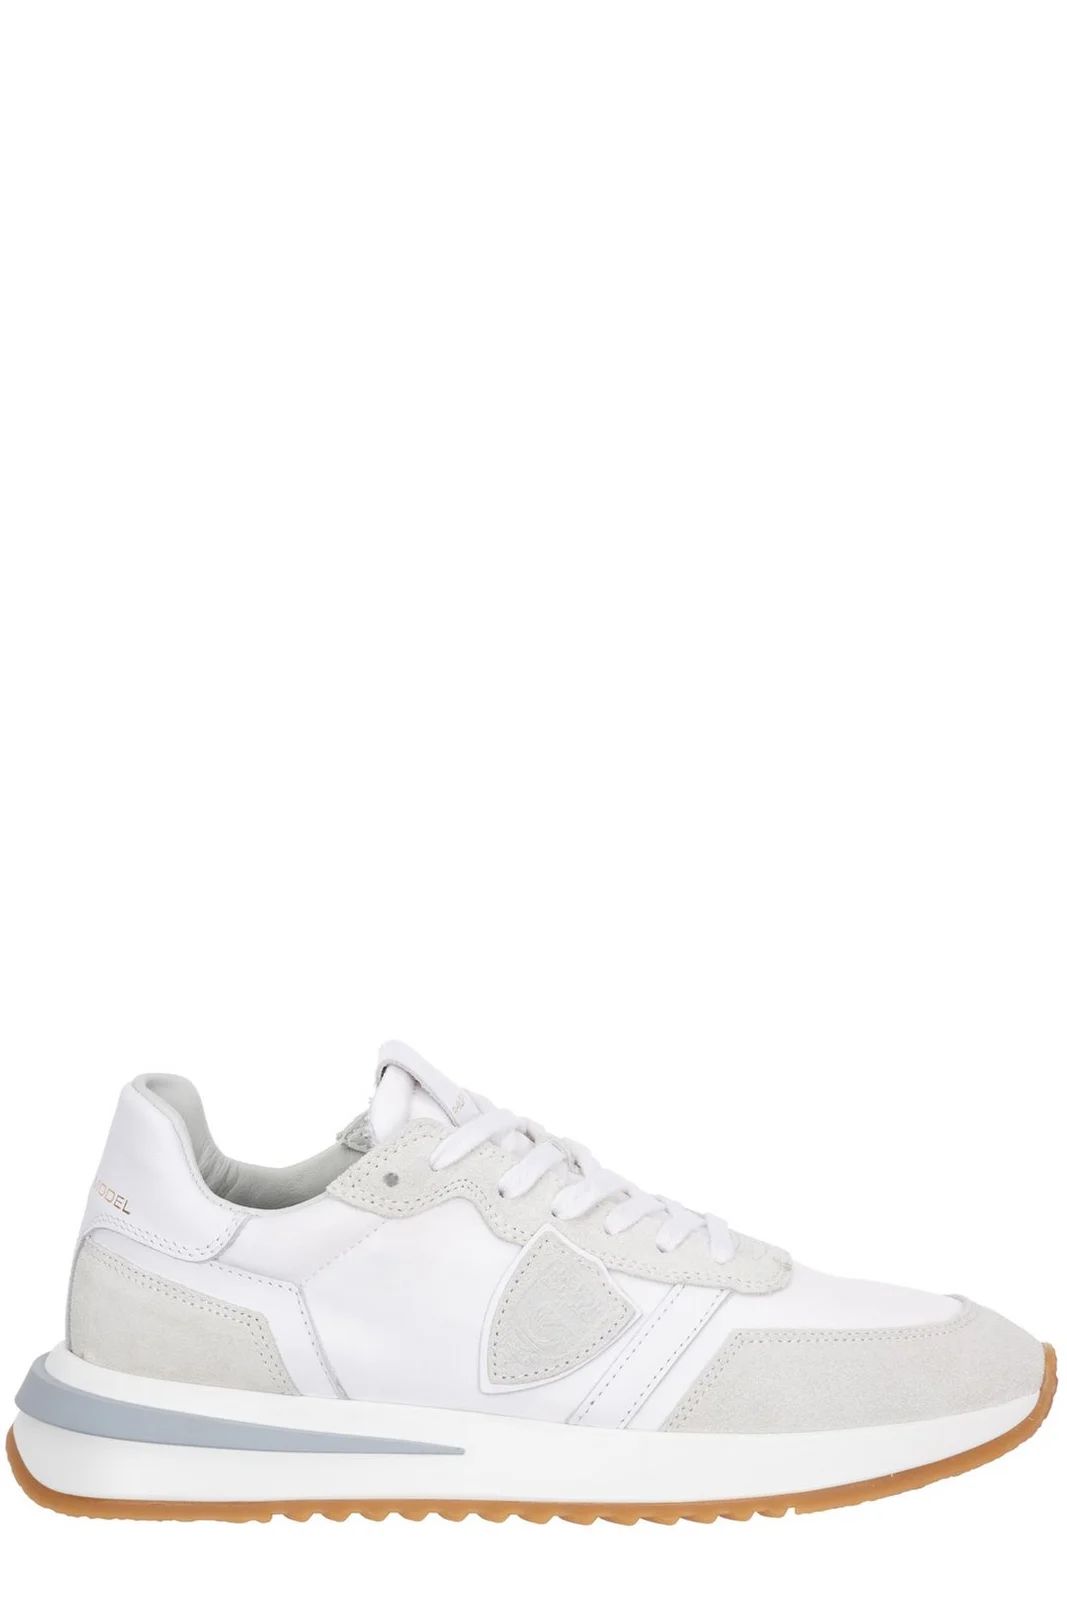 Philippe Model Tropez 2.1 Lace-Up Sneakers | Cettire Global